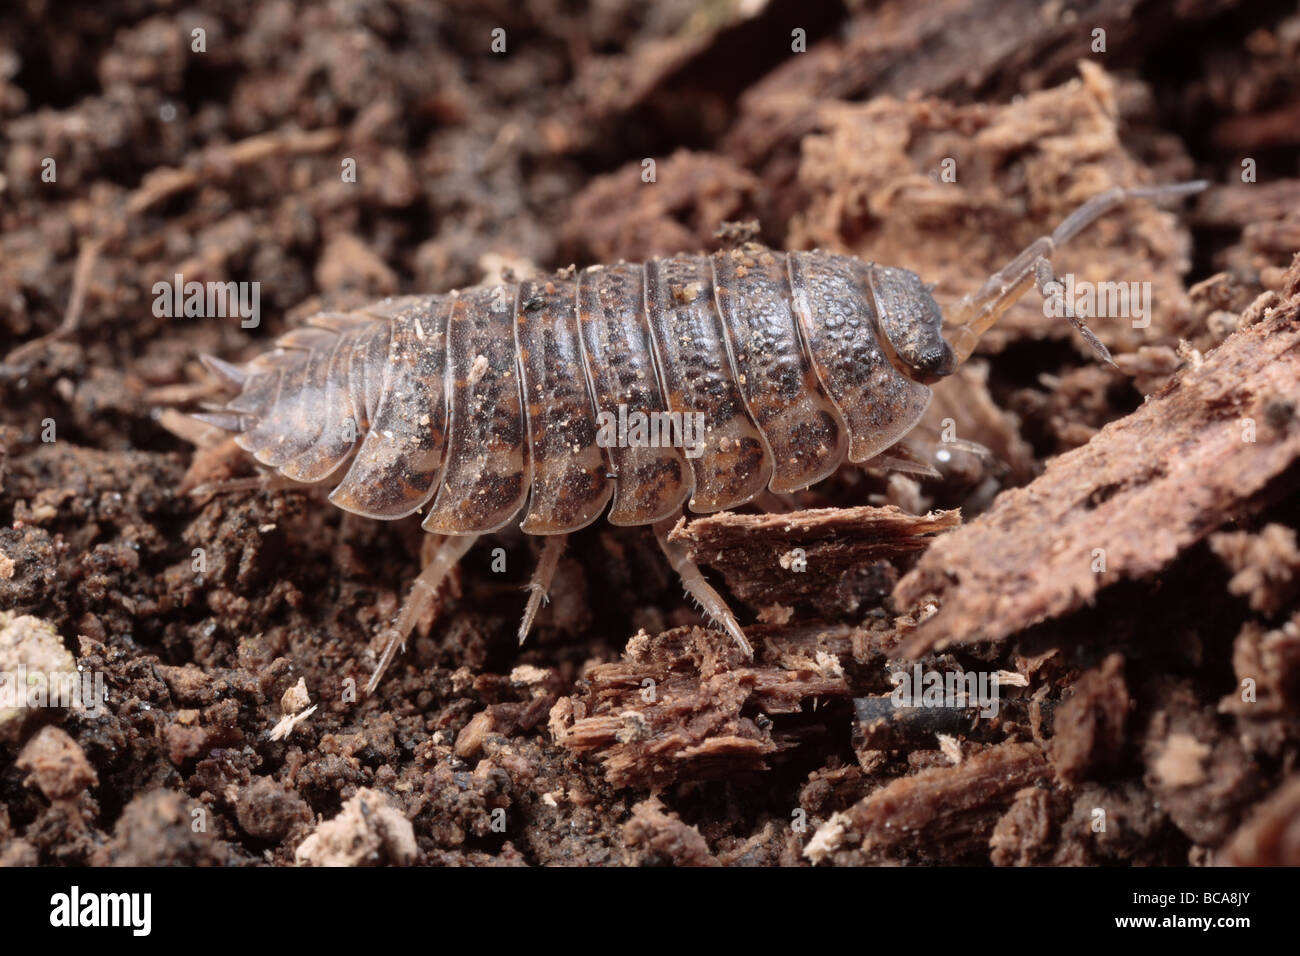 A pill bug or pillbug feeds on forest litter. Stock Photo